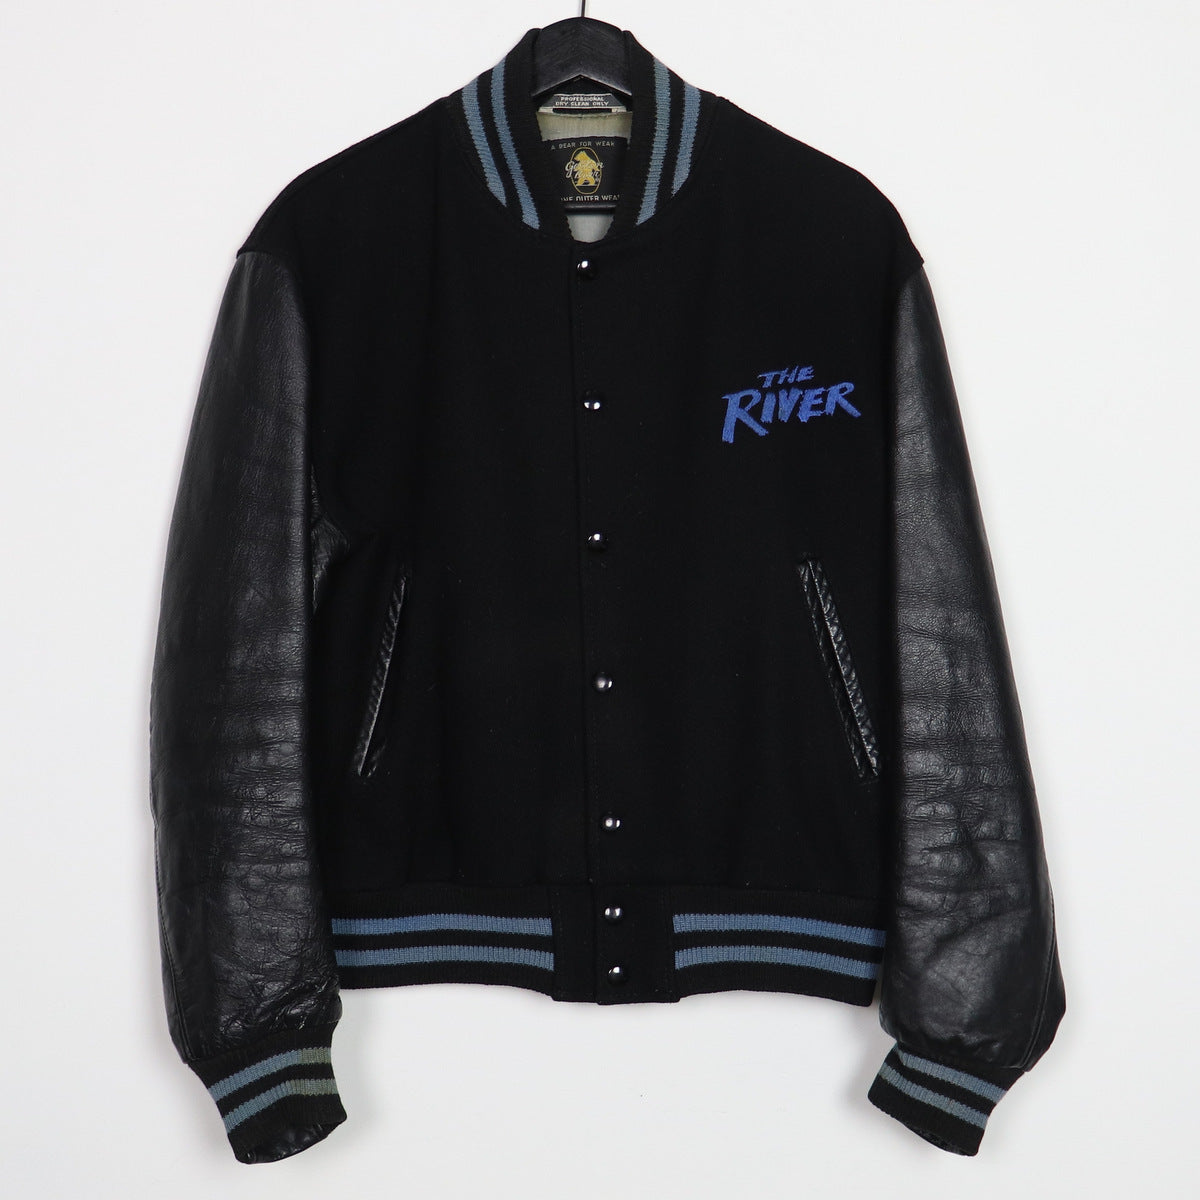 1980 Bruce Springsteen The River World Tour Jacket